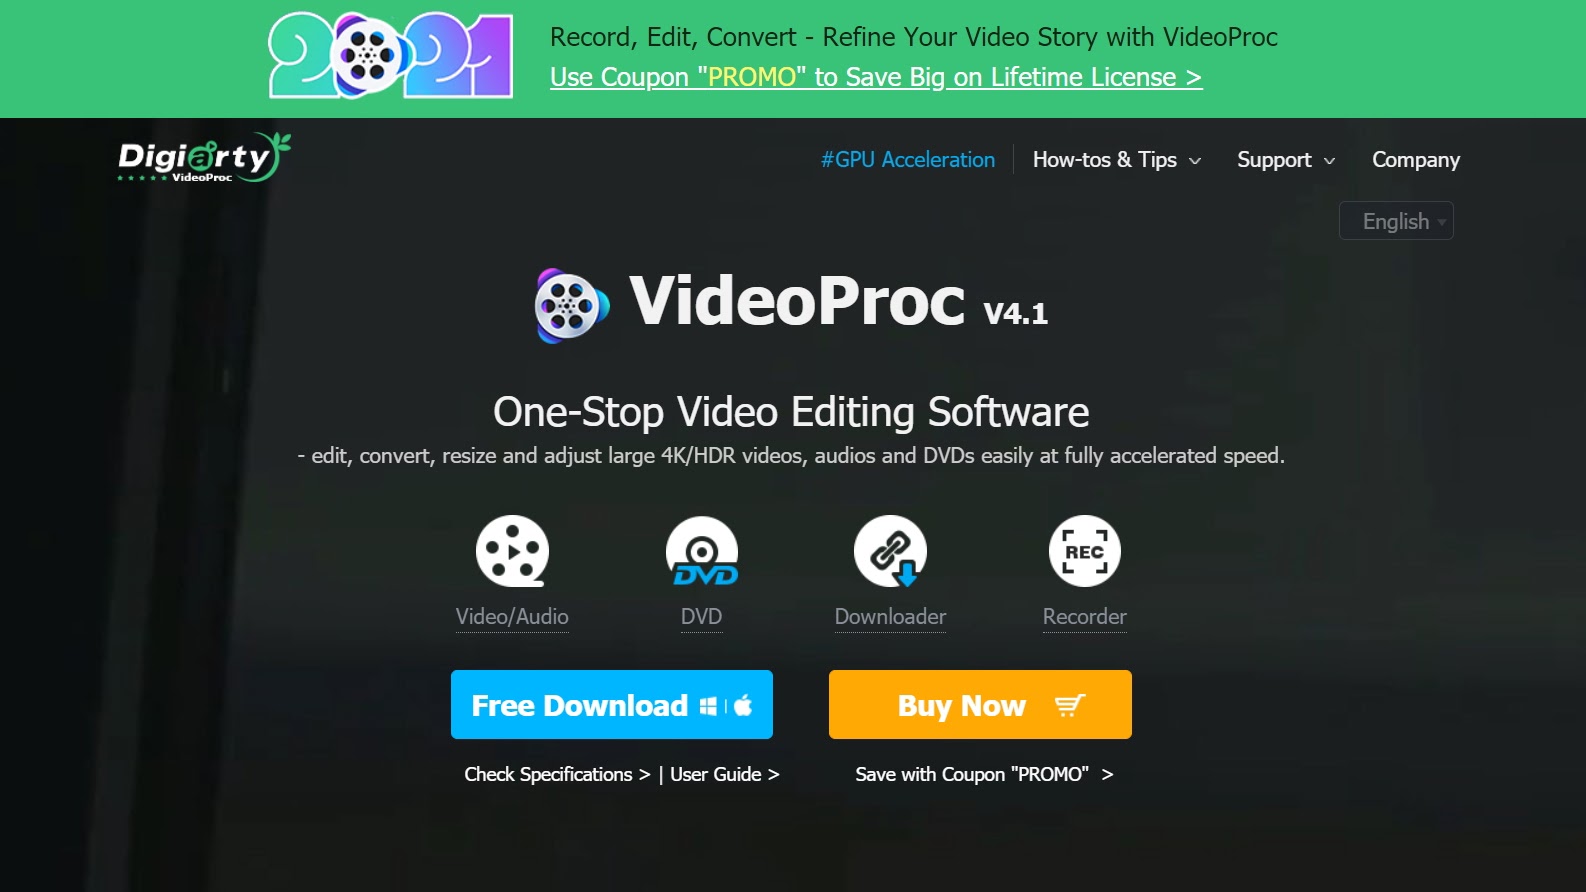 videoproc by digiarty